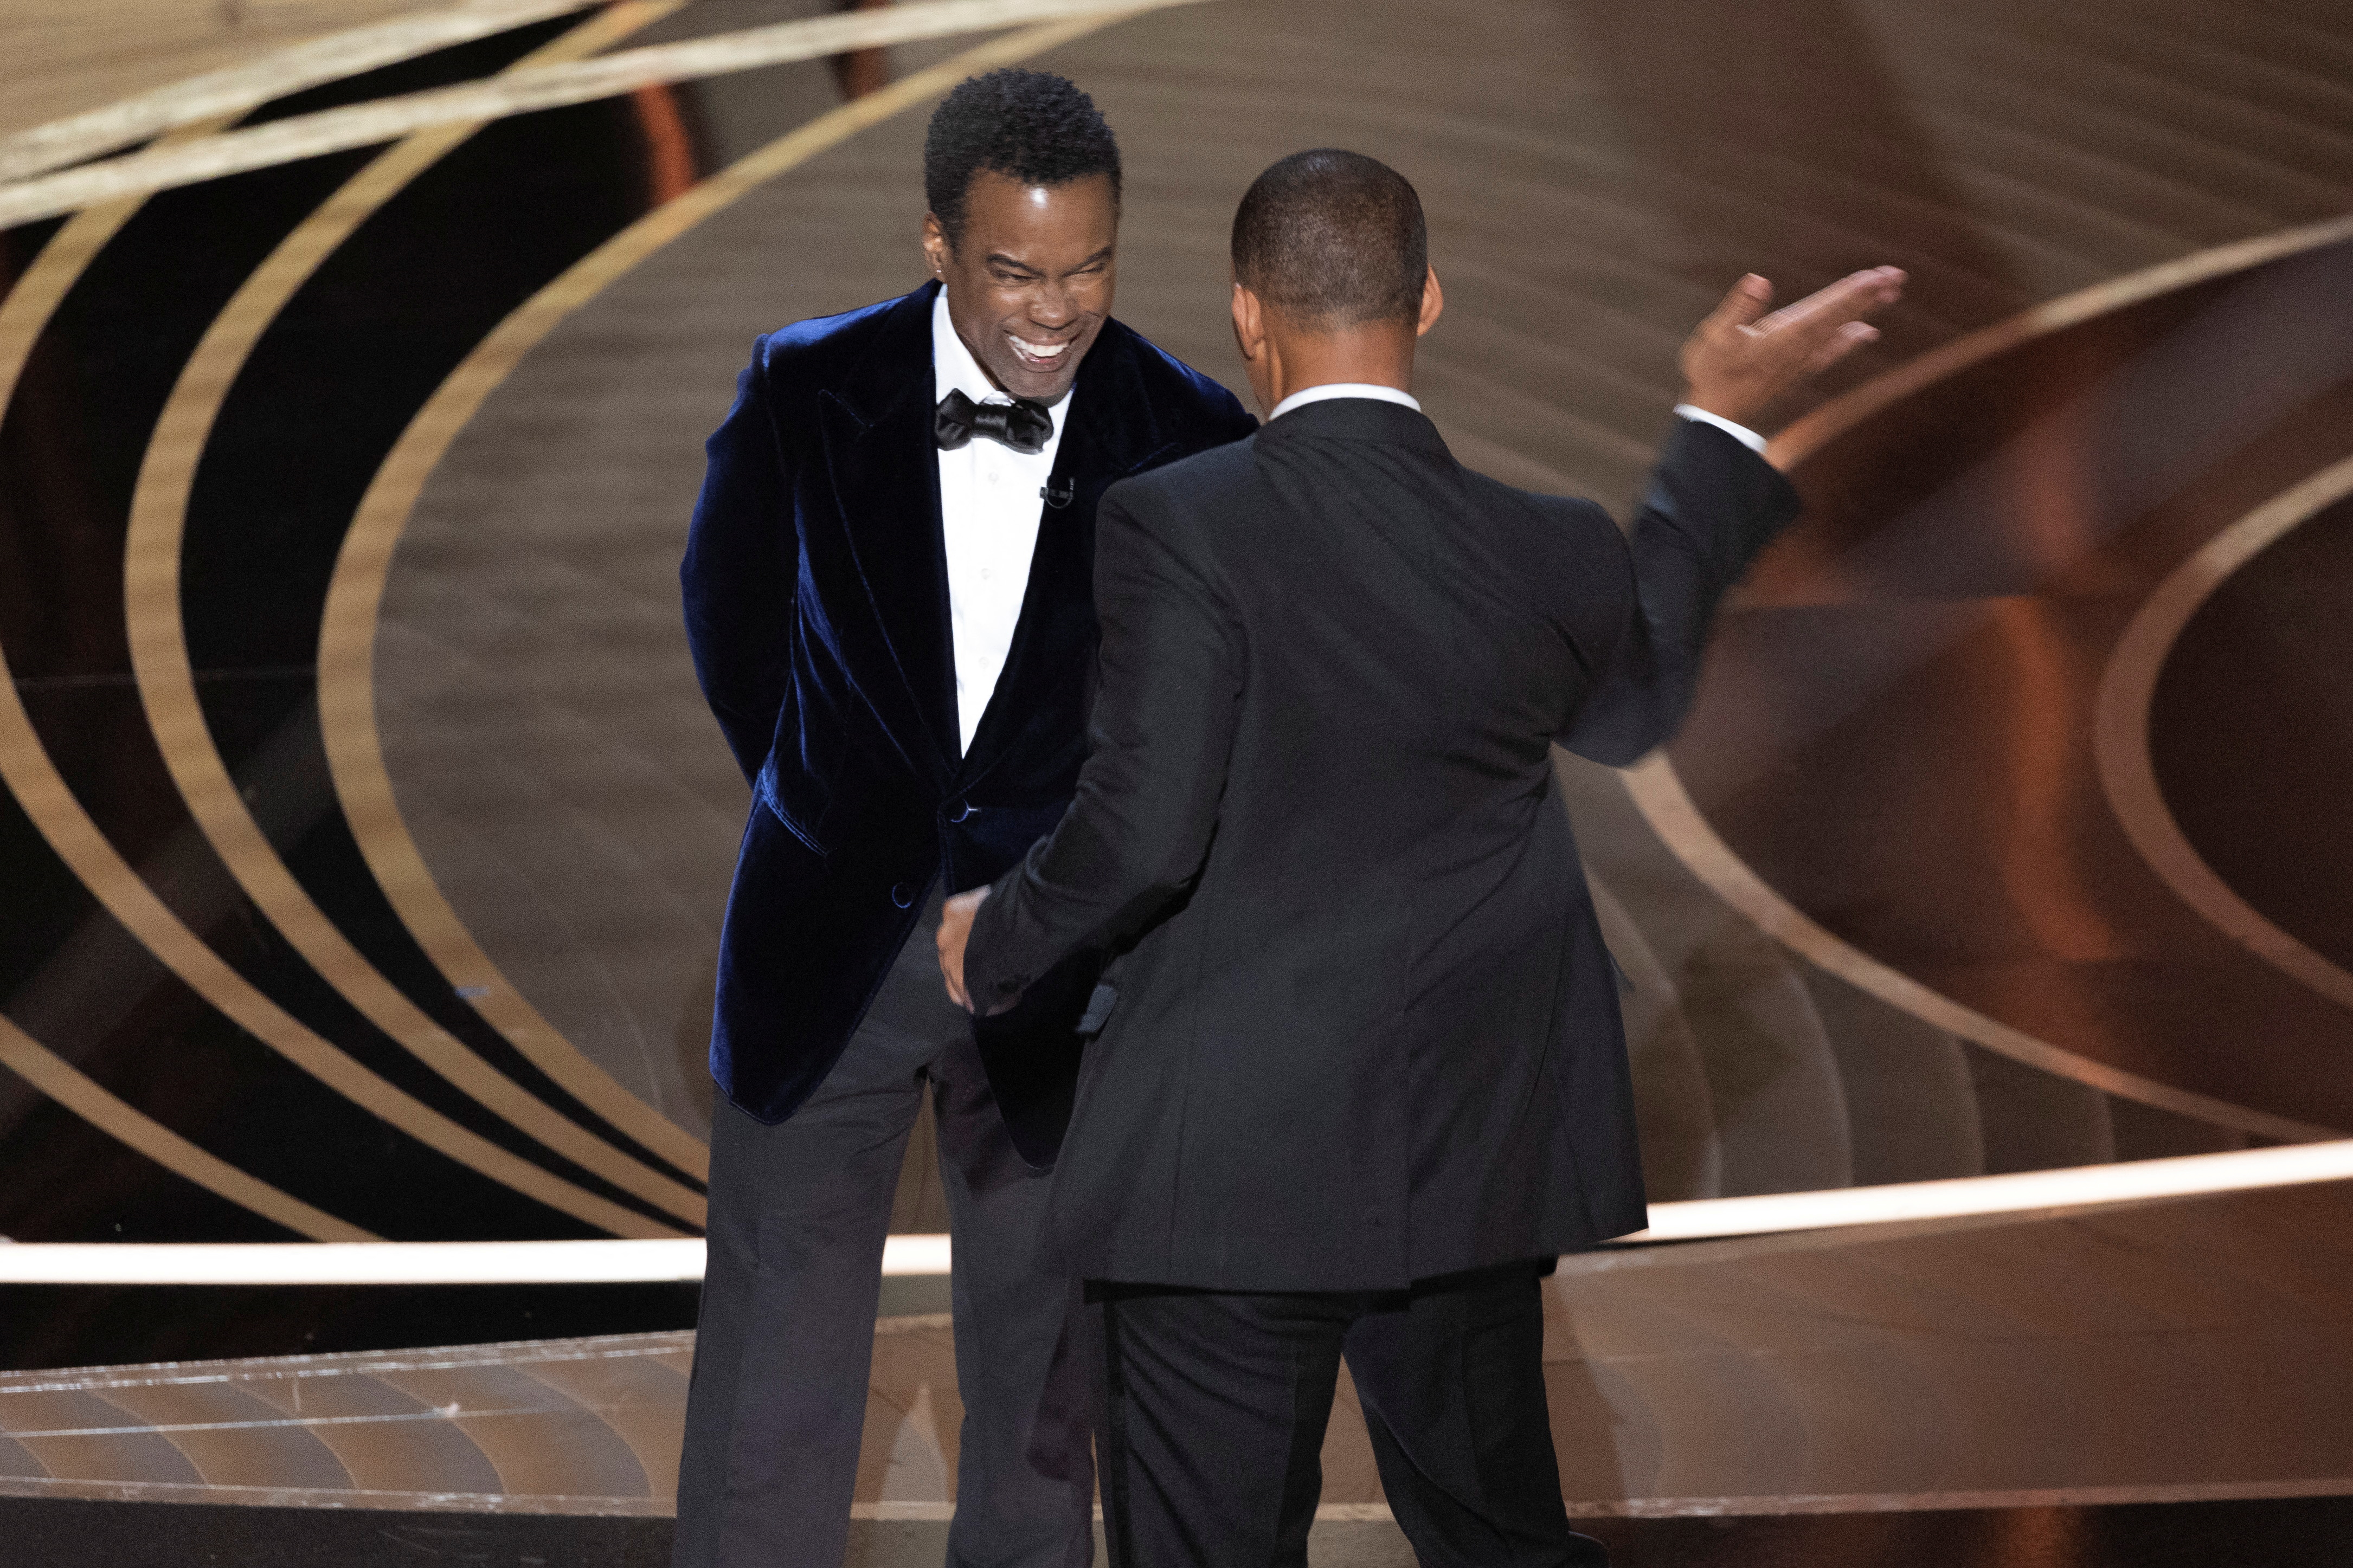 Will Smith winds up for the slap heard around the world